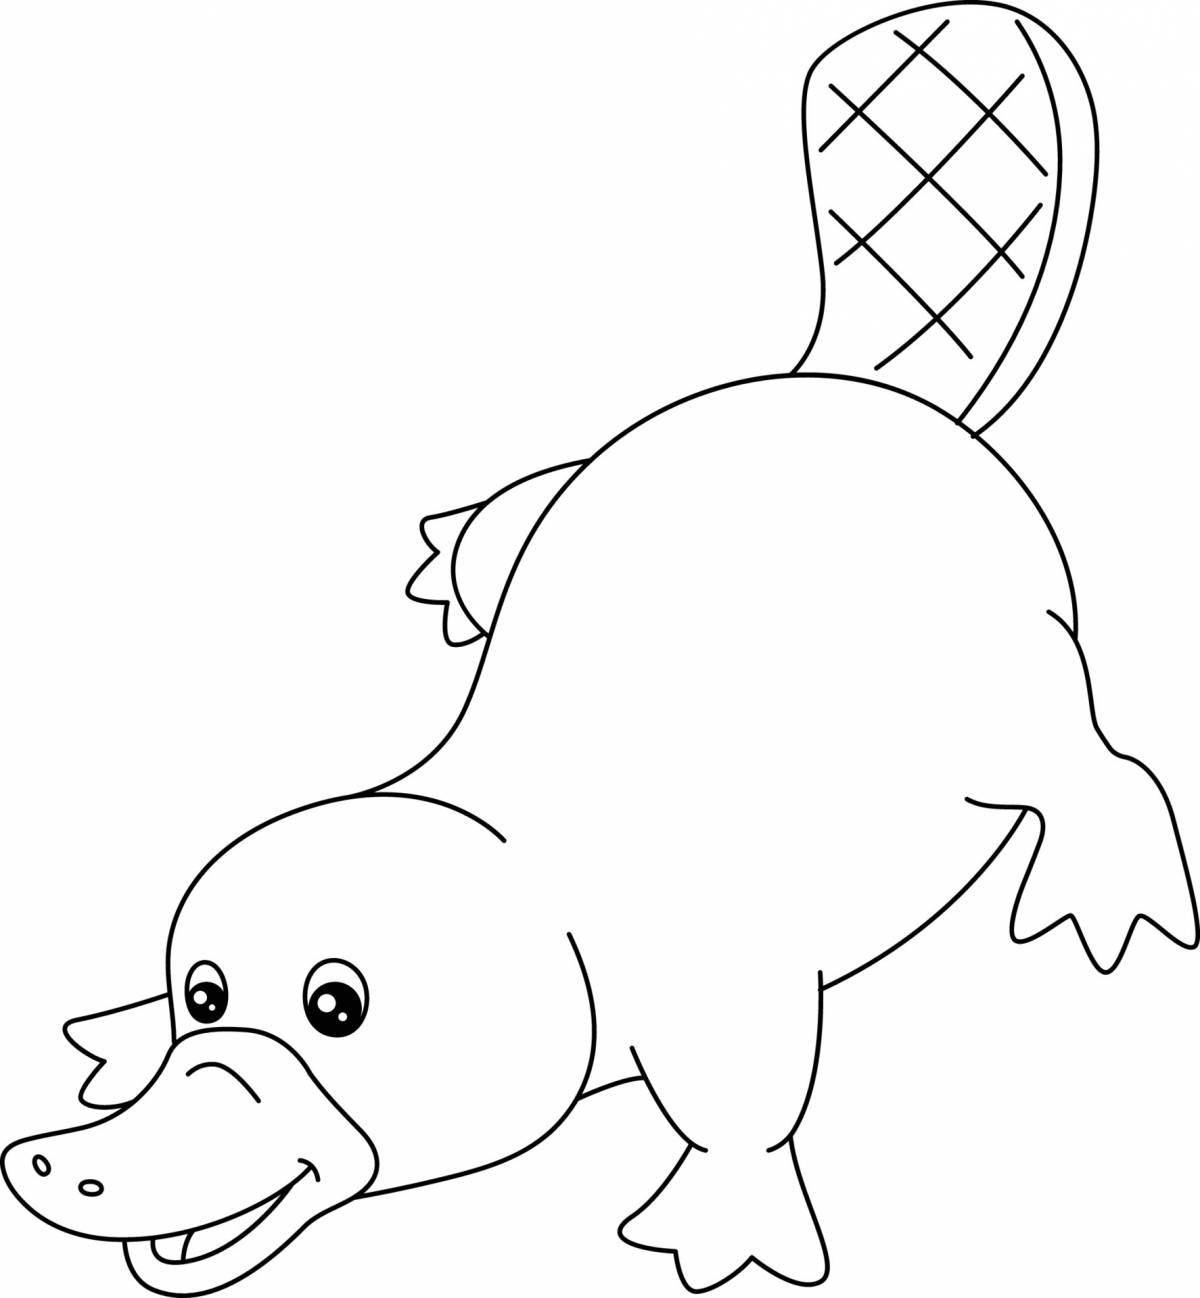 Fairytale coloring book platypus for kids